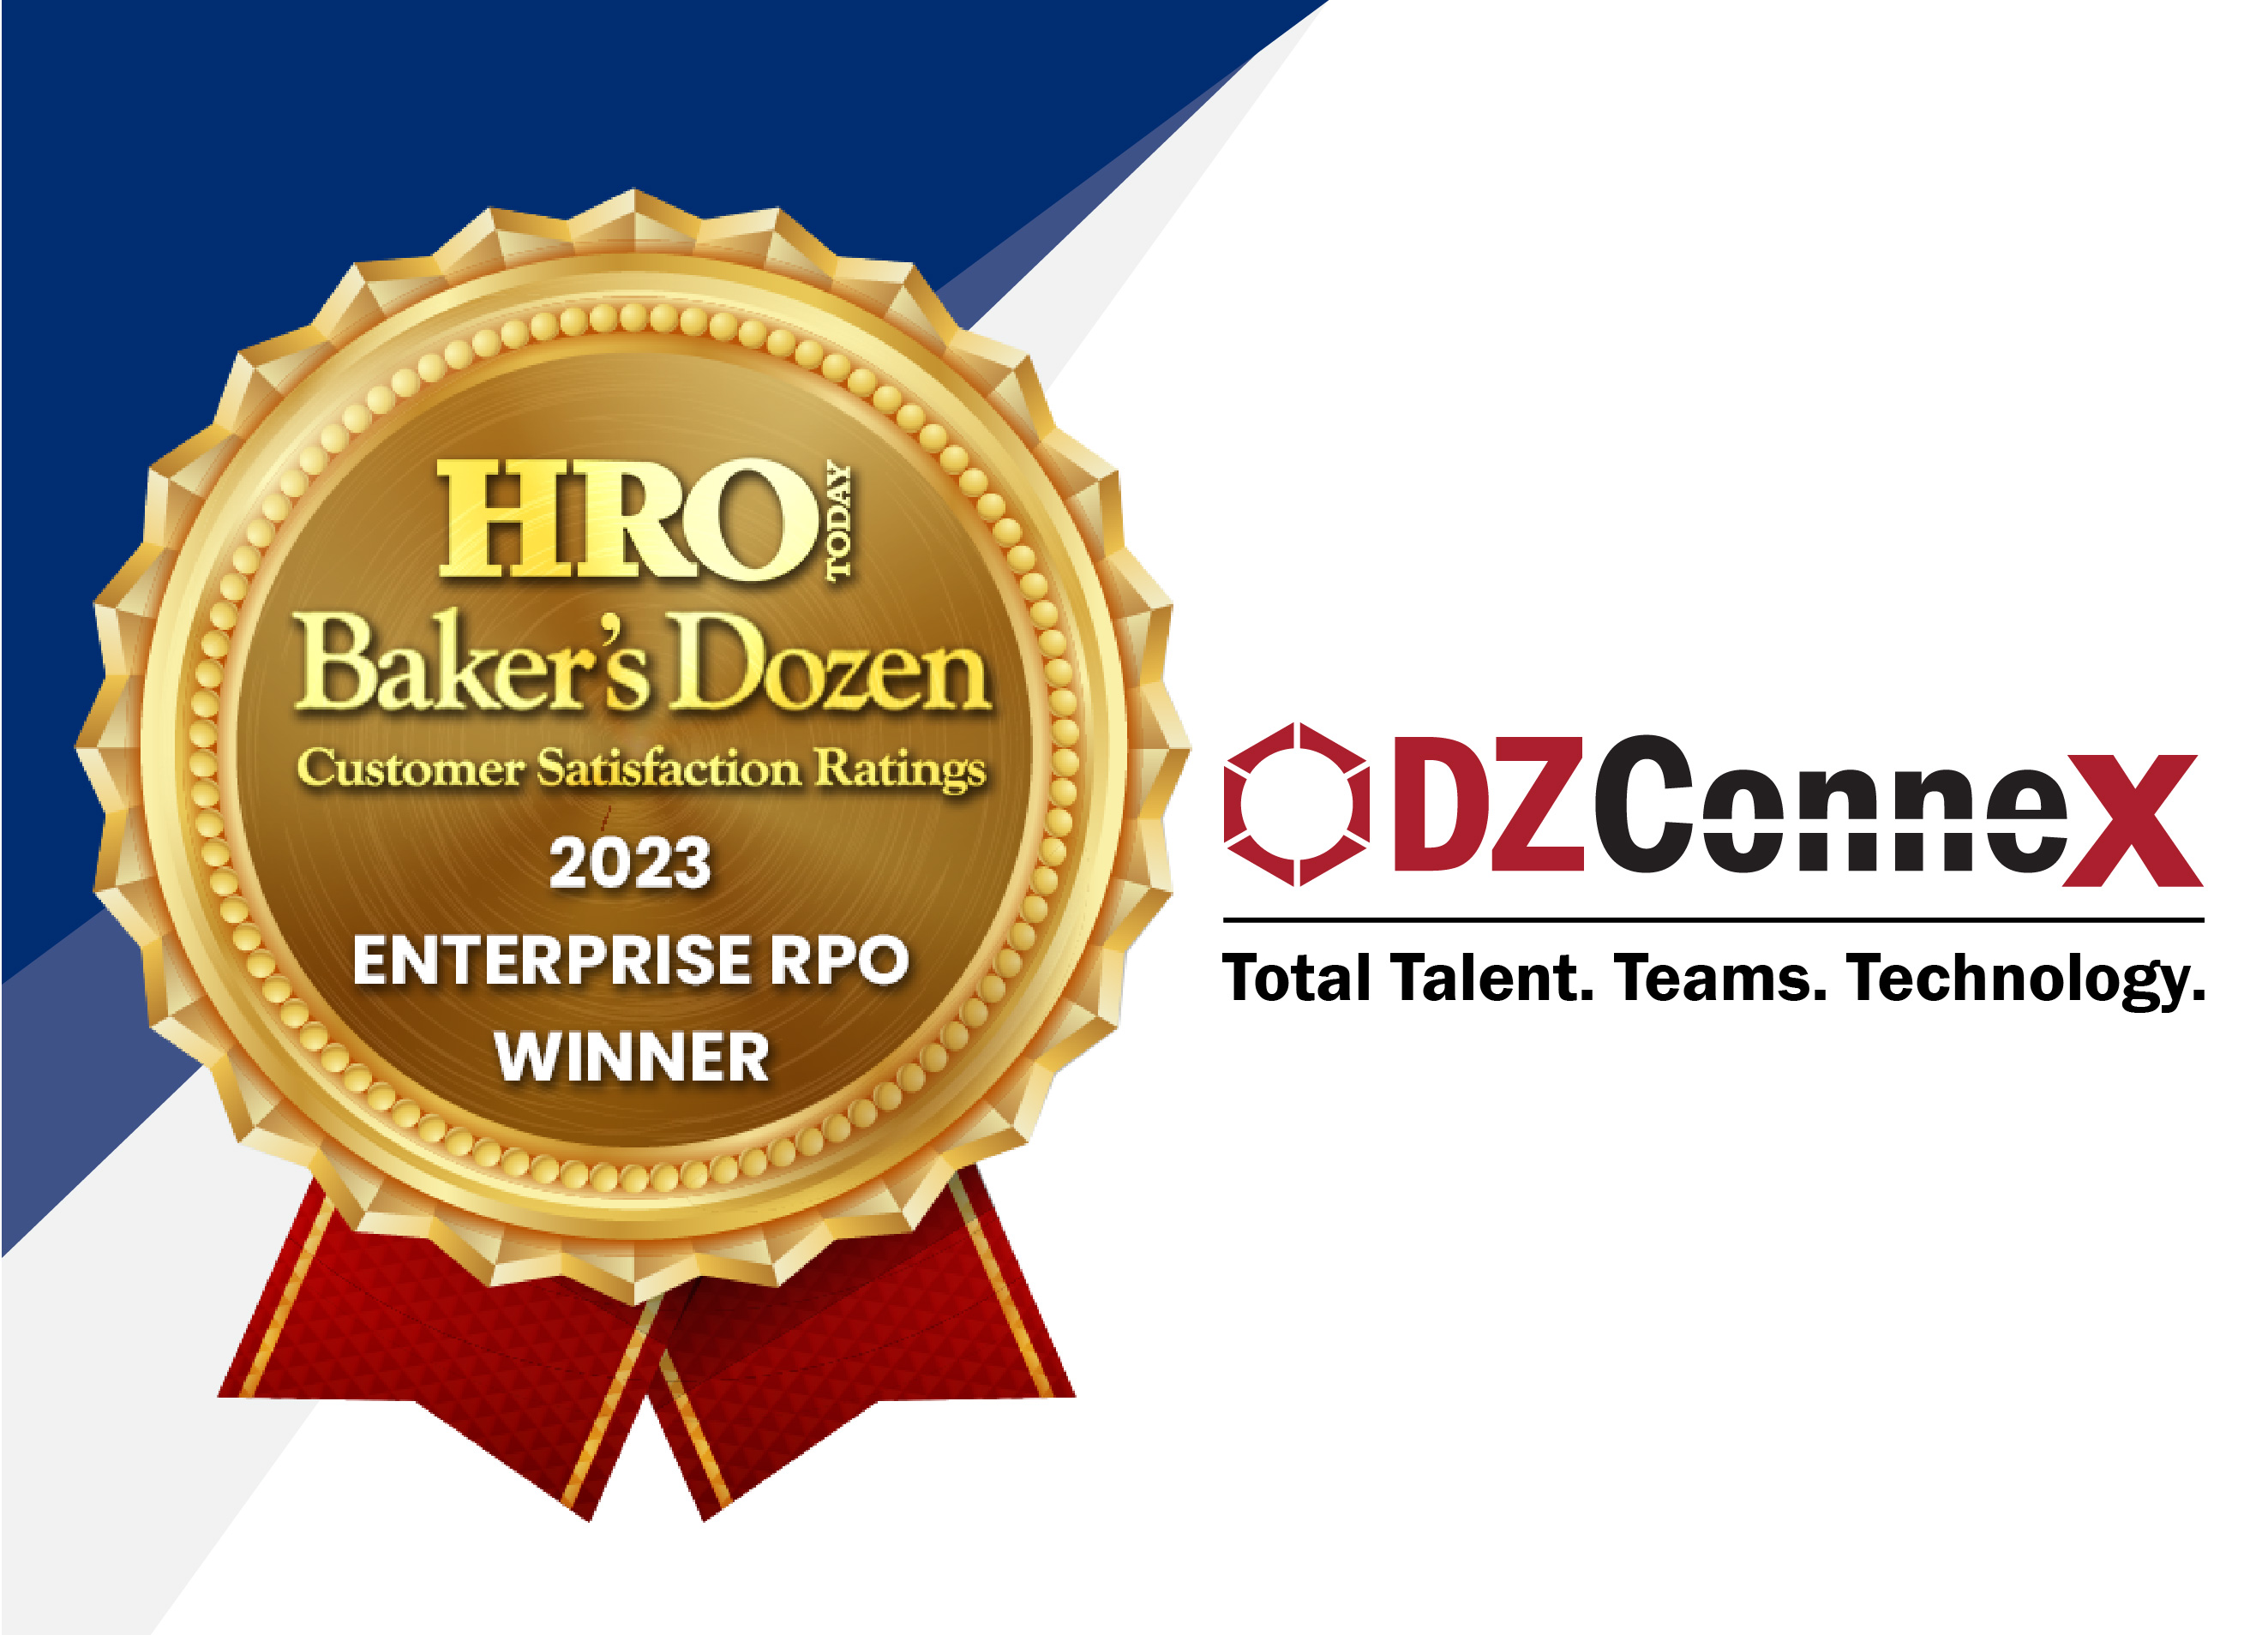 DZConneX Earns 9th-Straight Placement on Baker’s Dozen Customer Satisfaction Ratings for Recruitment Process Outsourcing